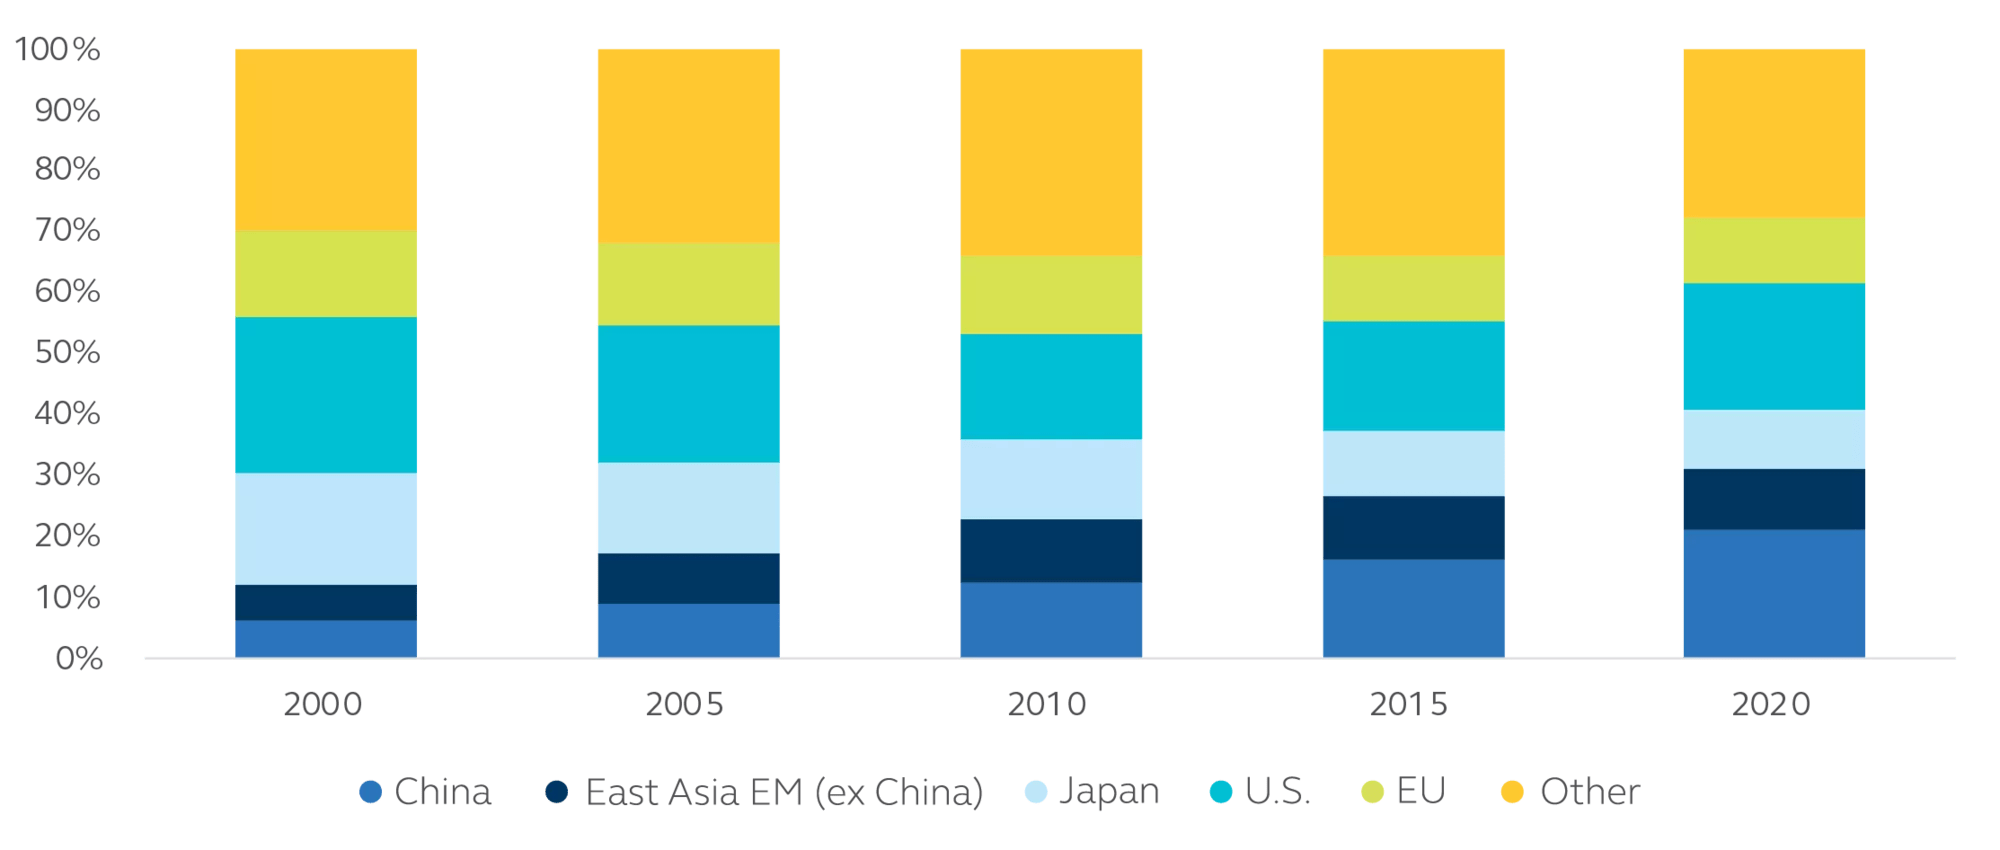 Stacked bar graph showing sources of final demand for emerging East Asia exports from 2000-2020